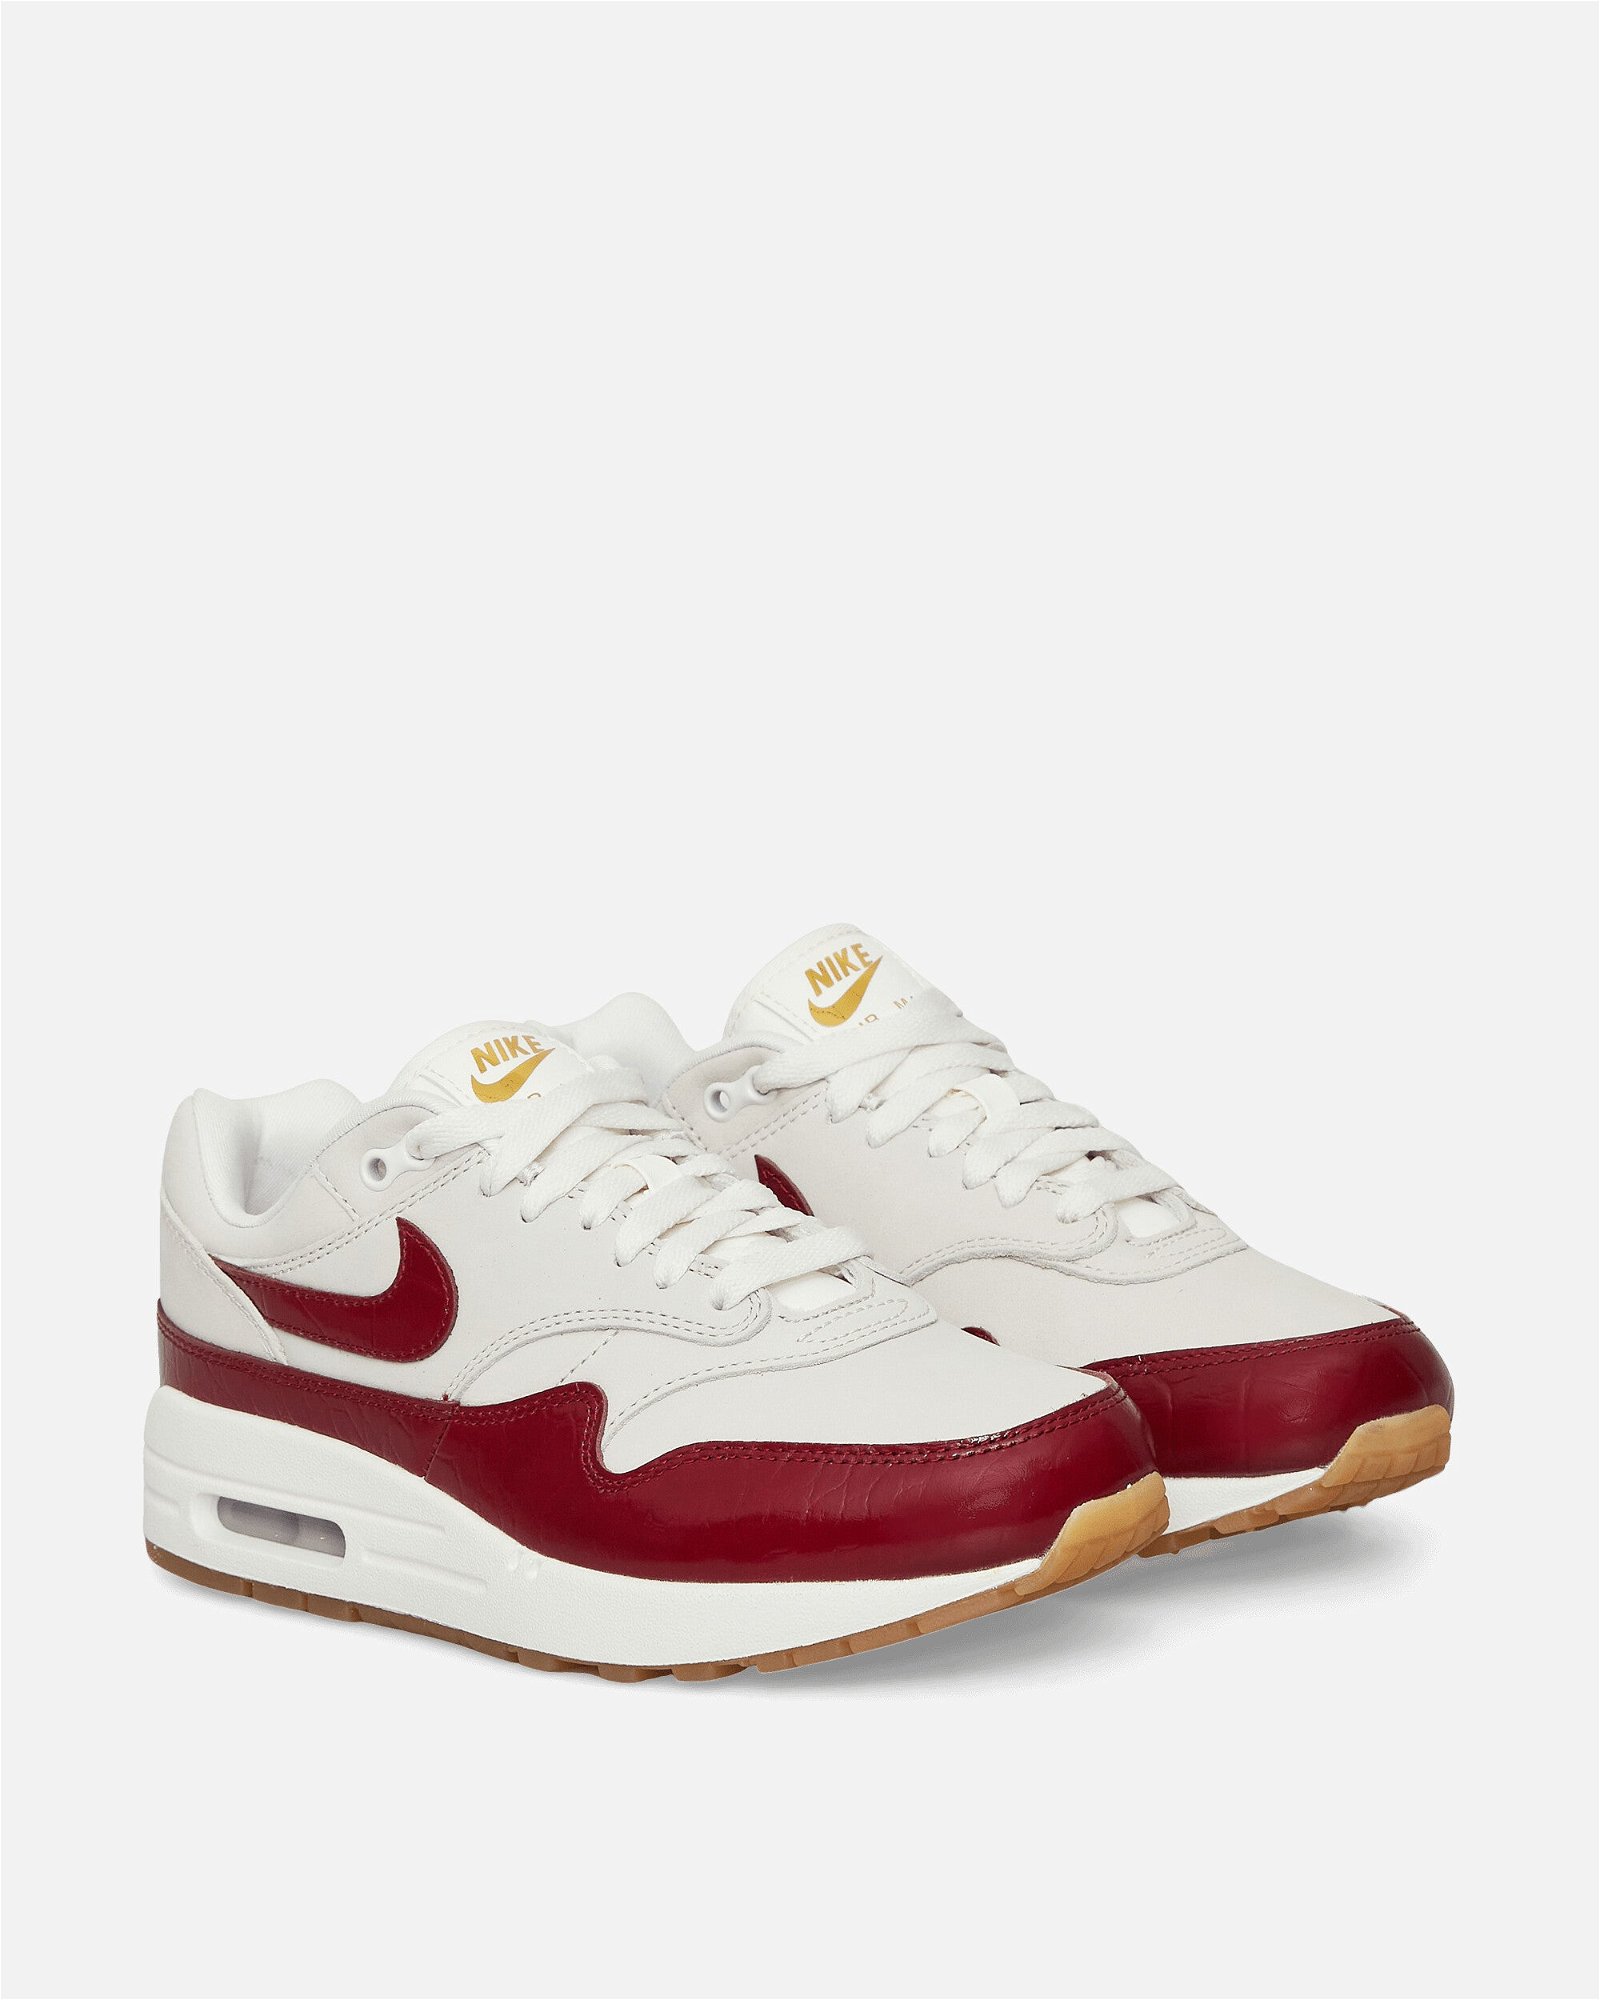 Air Max 1 LX "Team Red Leather"